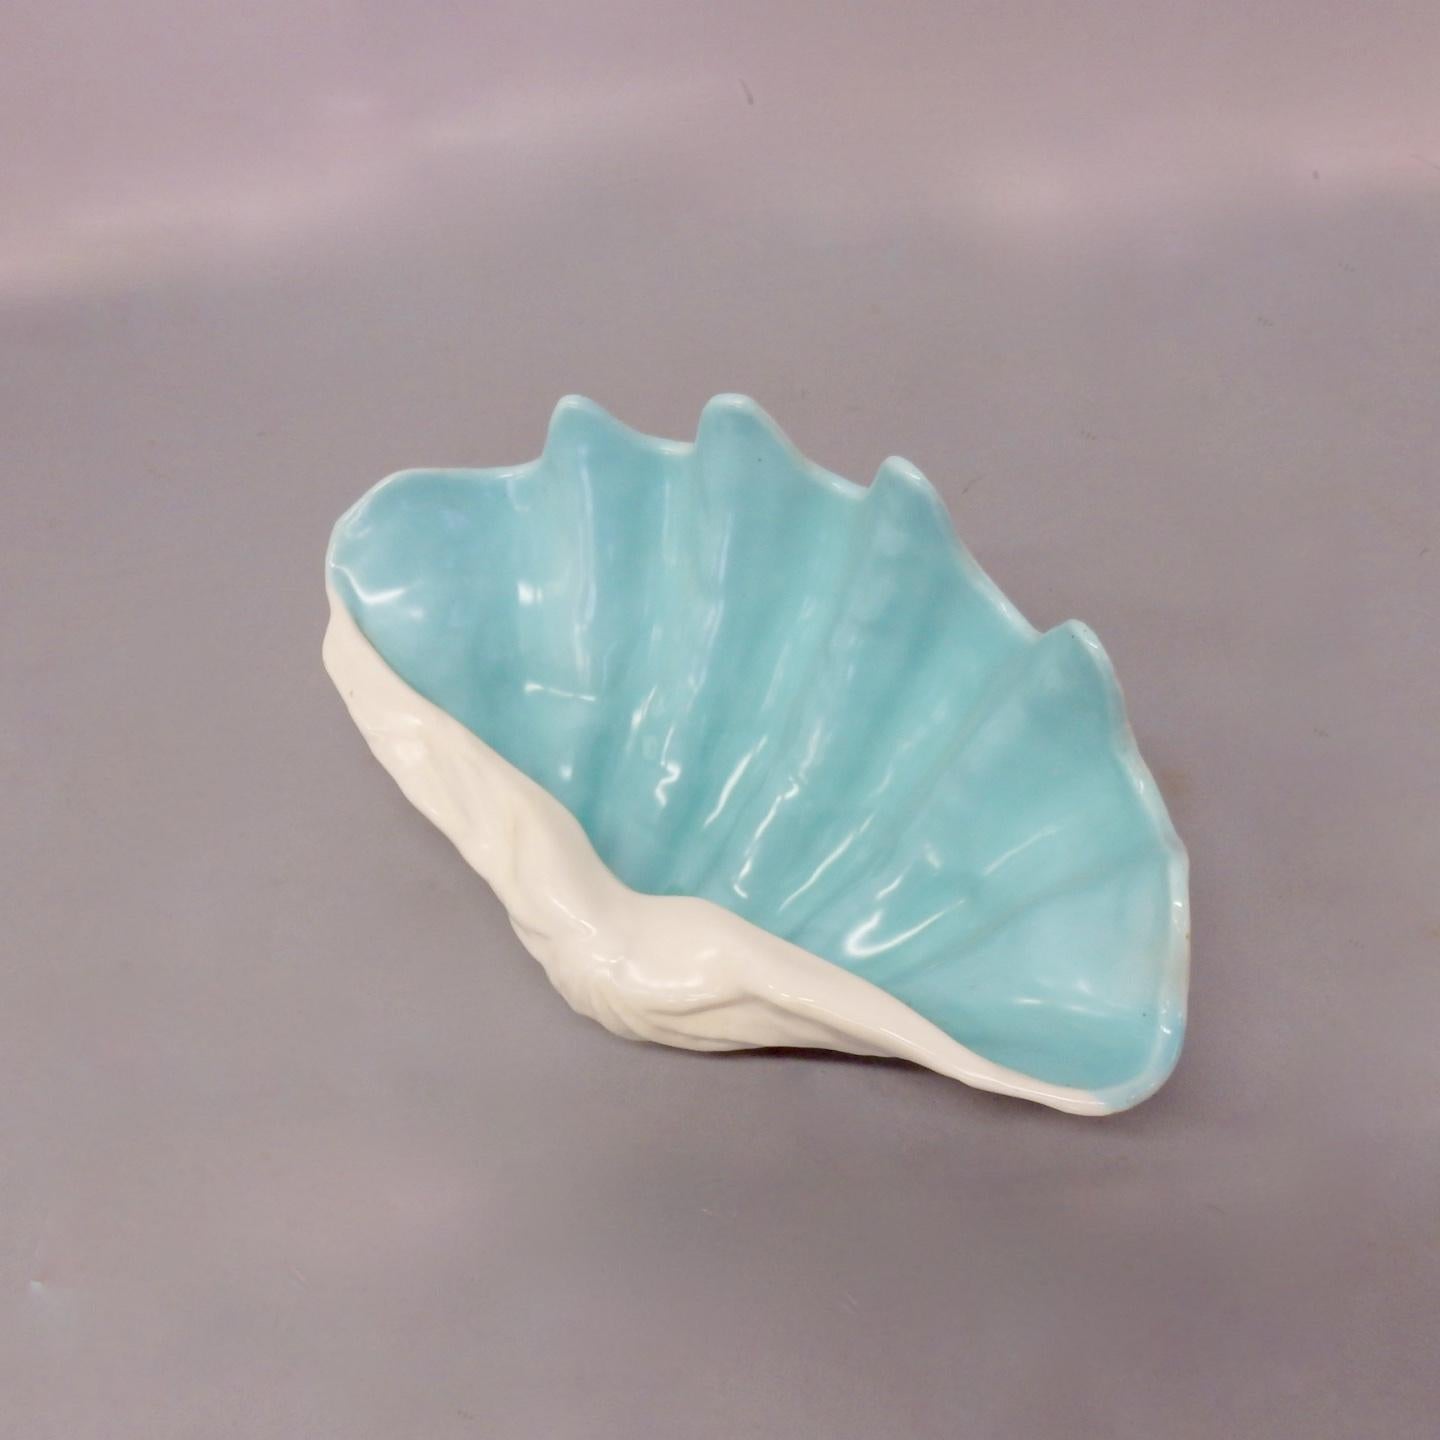 Mid-Century Modern White with Turquoise Interior Sea Shell Bowl or Vase